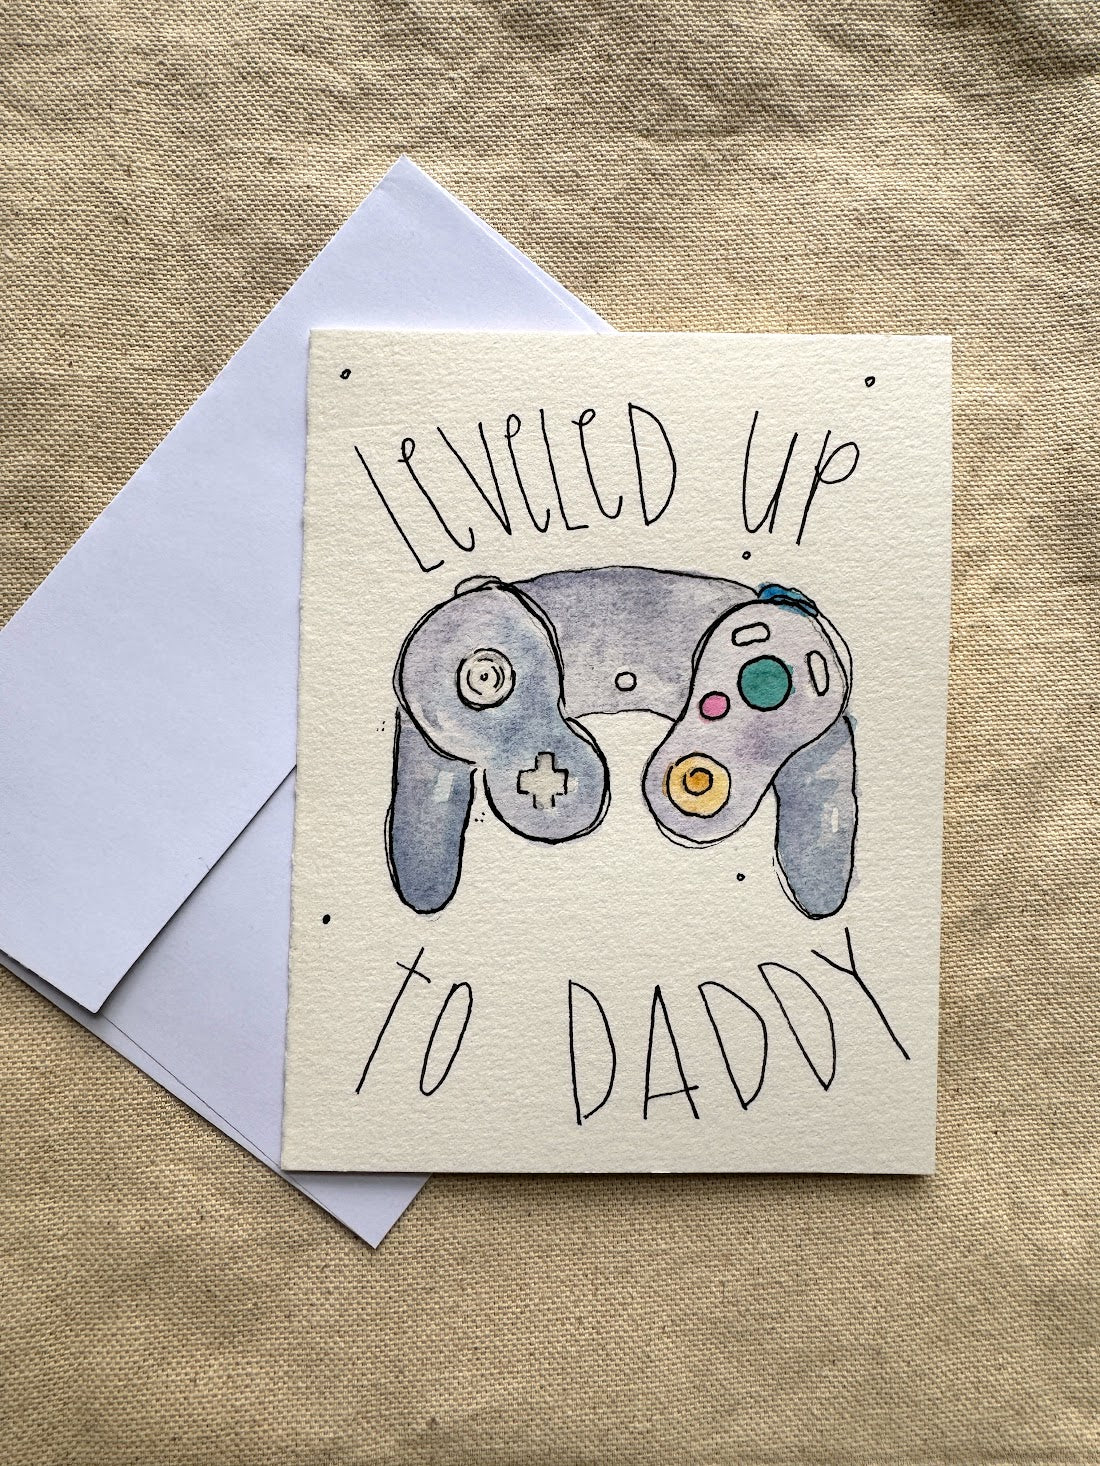 Level Up to Daddy Card